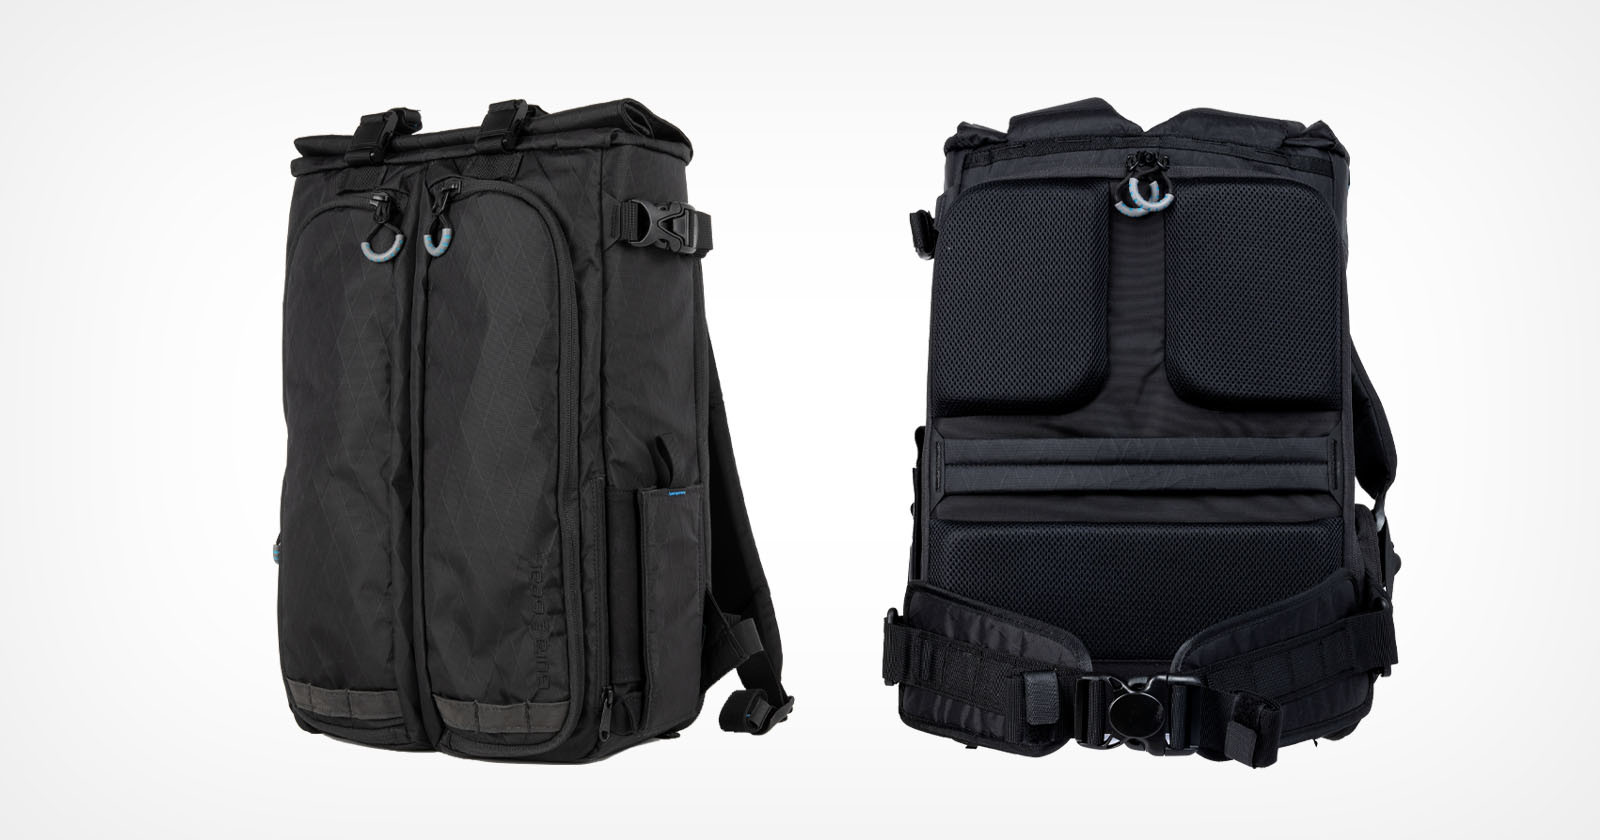 Gura Gears Kiboko City Commuter is its First Backpack with a Roll Top